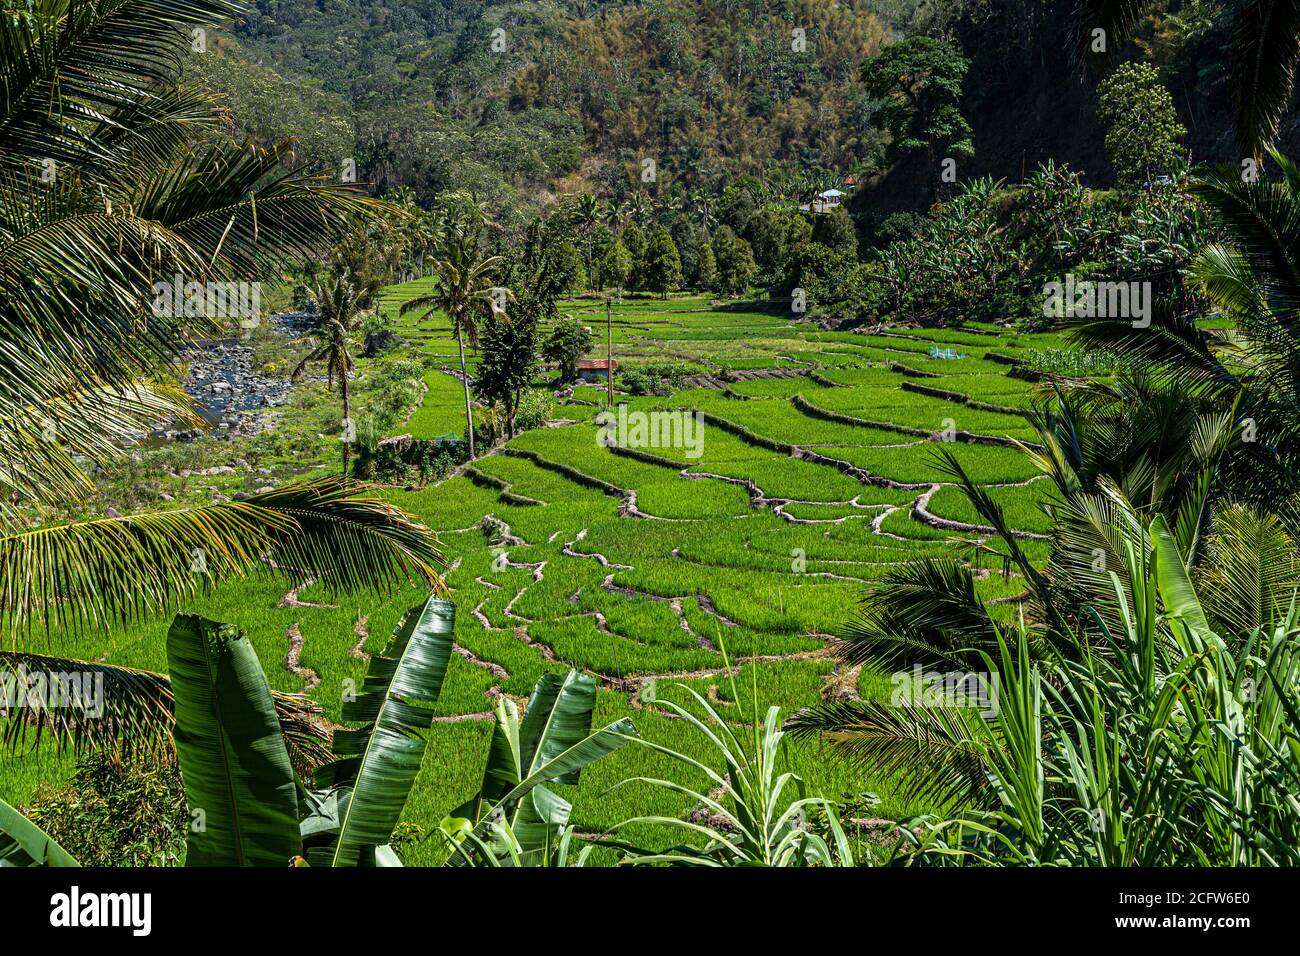 Rice fields in Indonesia. Fire and Dragons Cruise of the True North, Sunda Islands, Indonesia Stock Photo